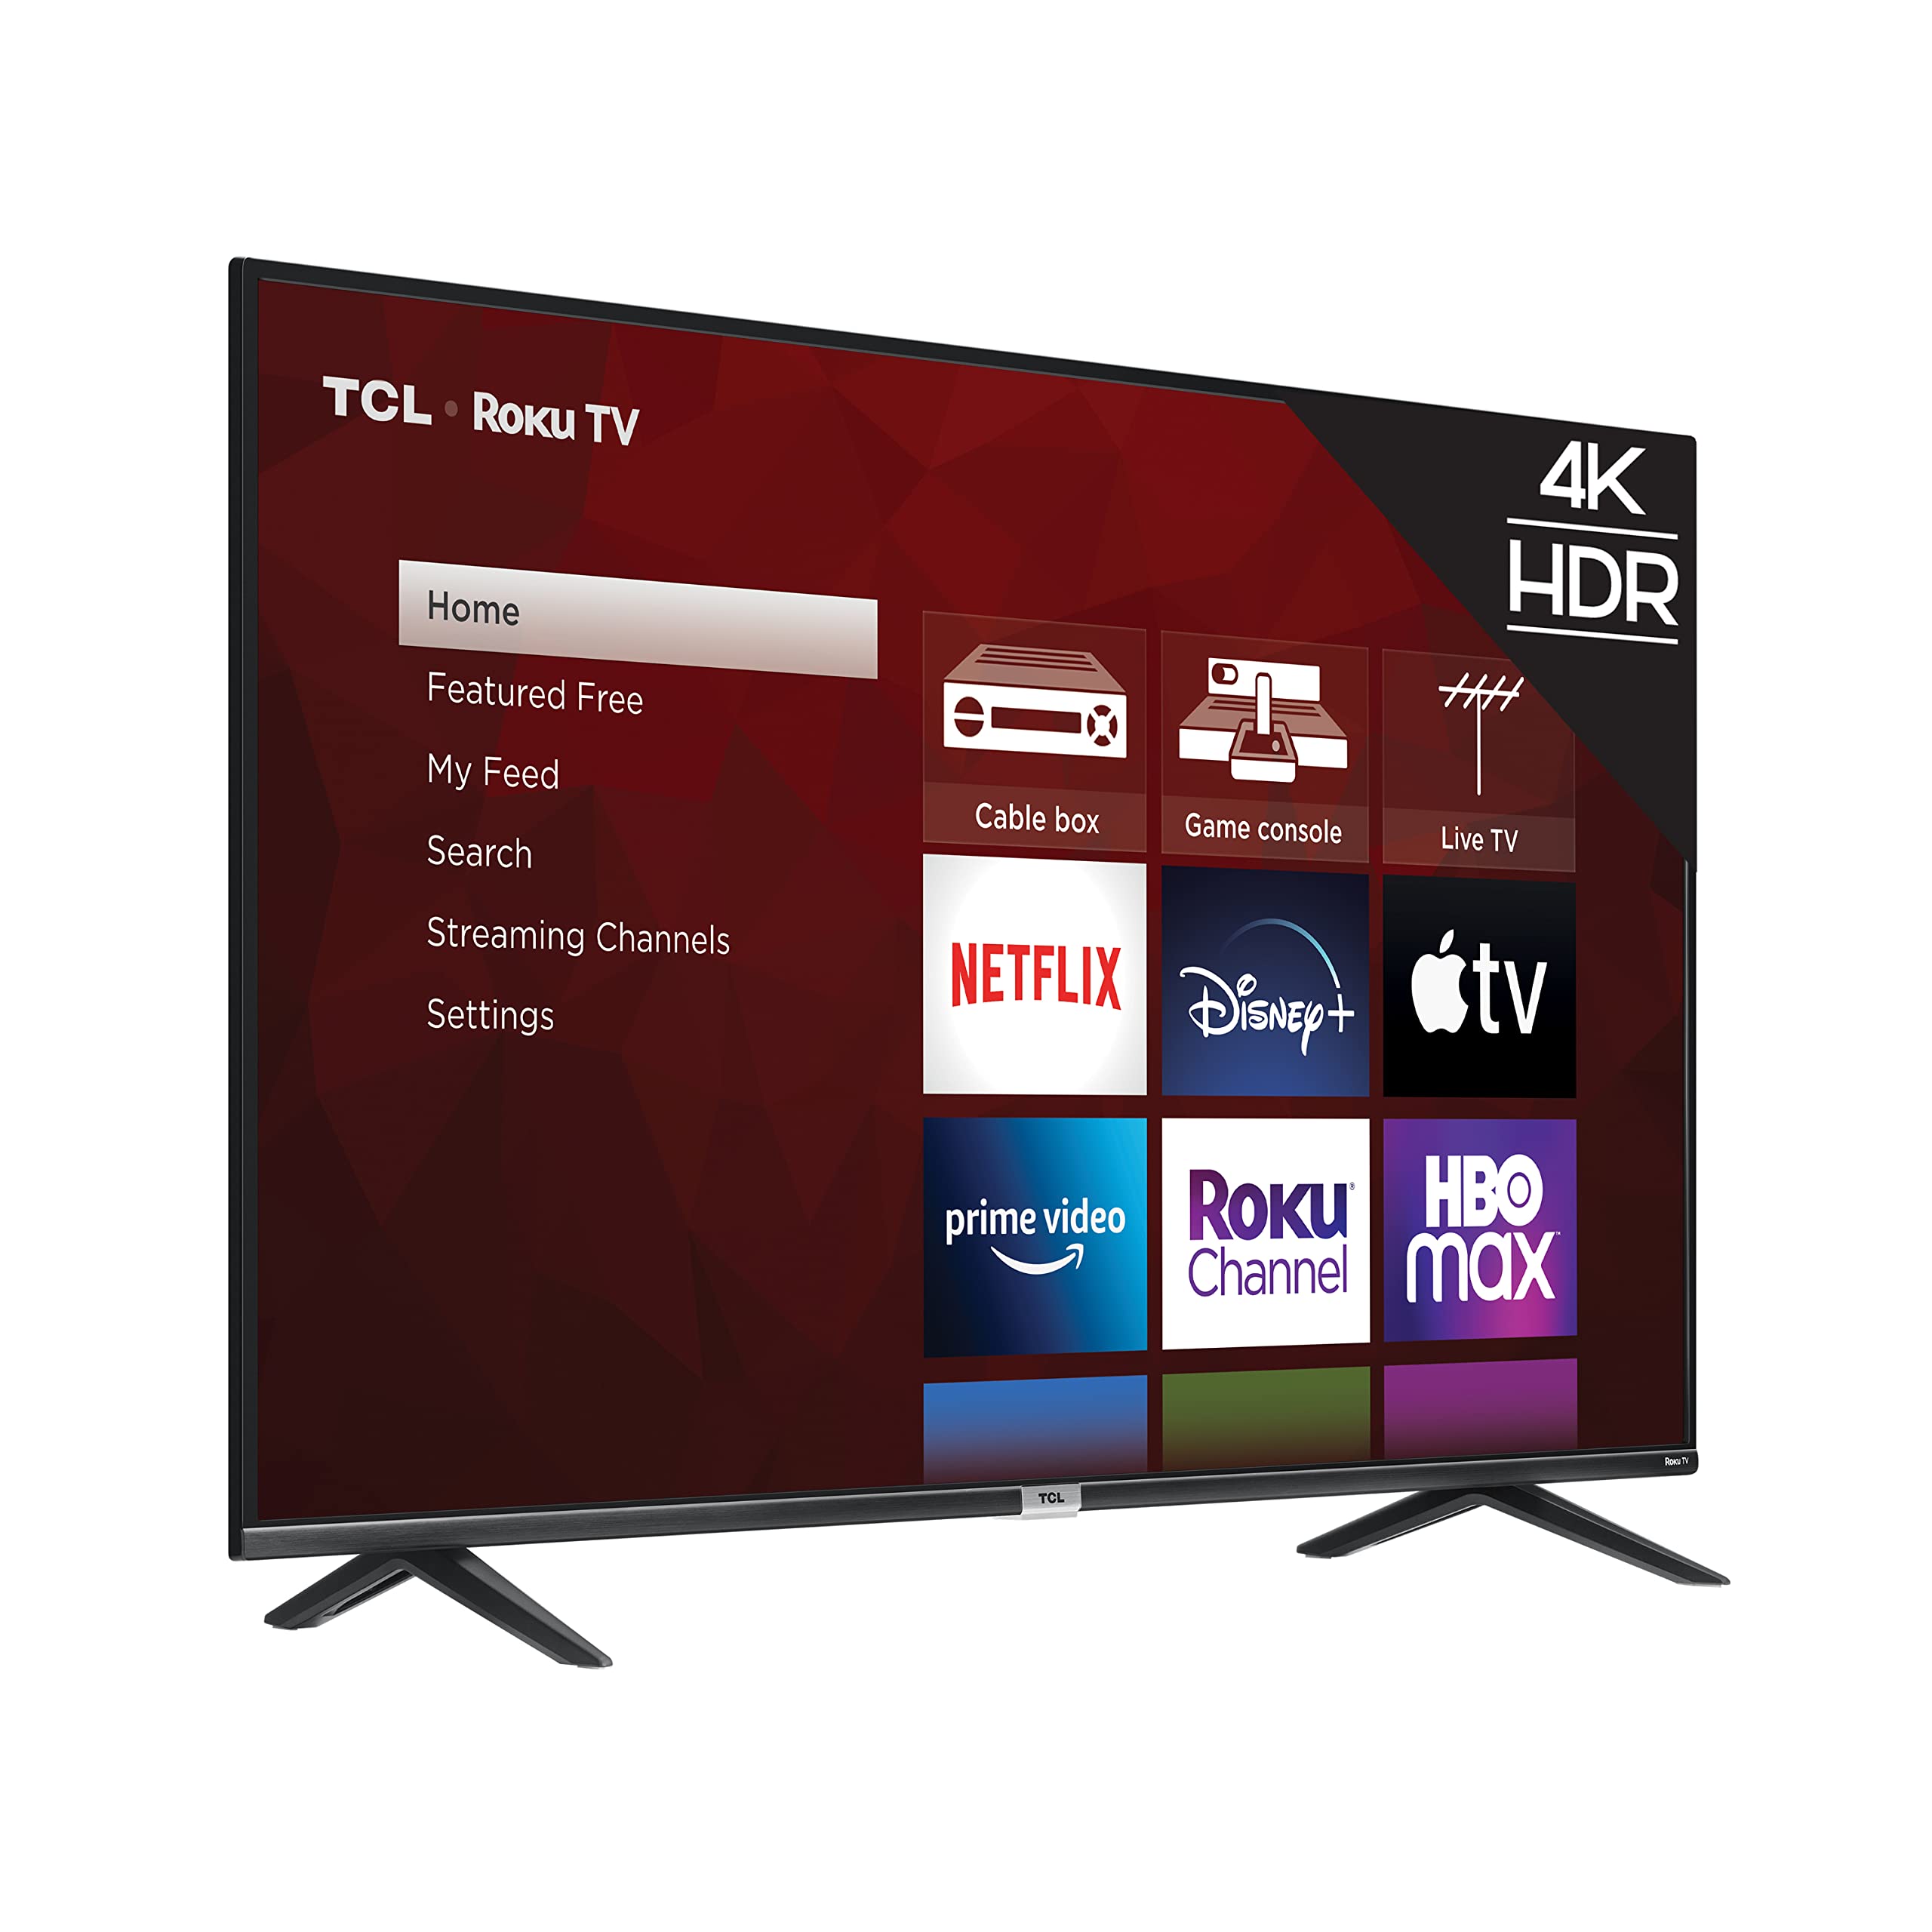 TCL 55